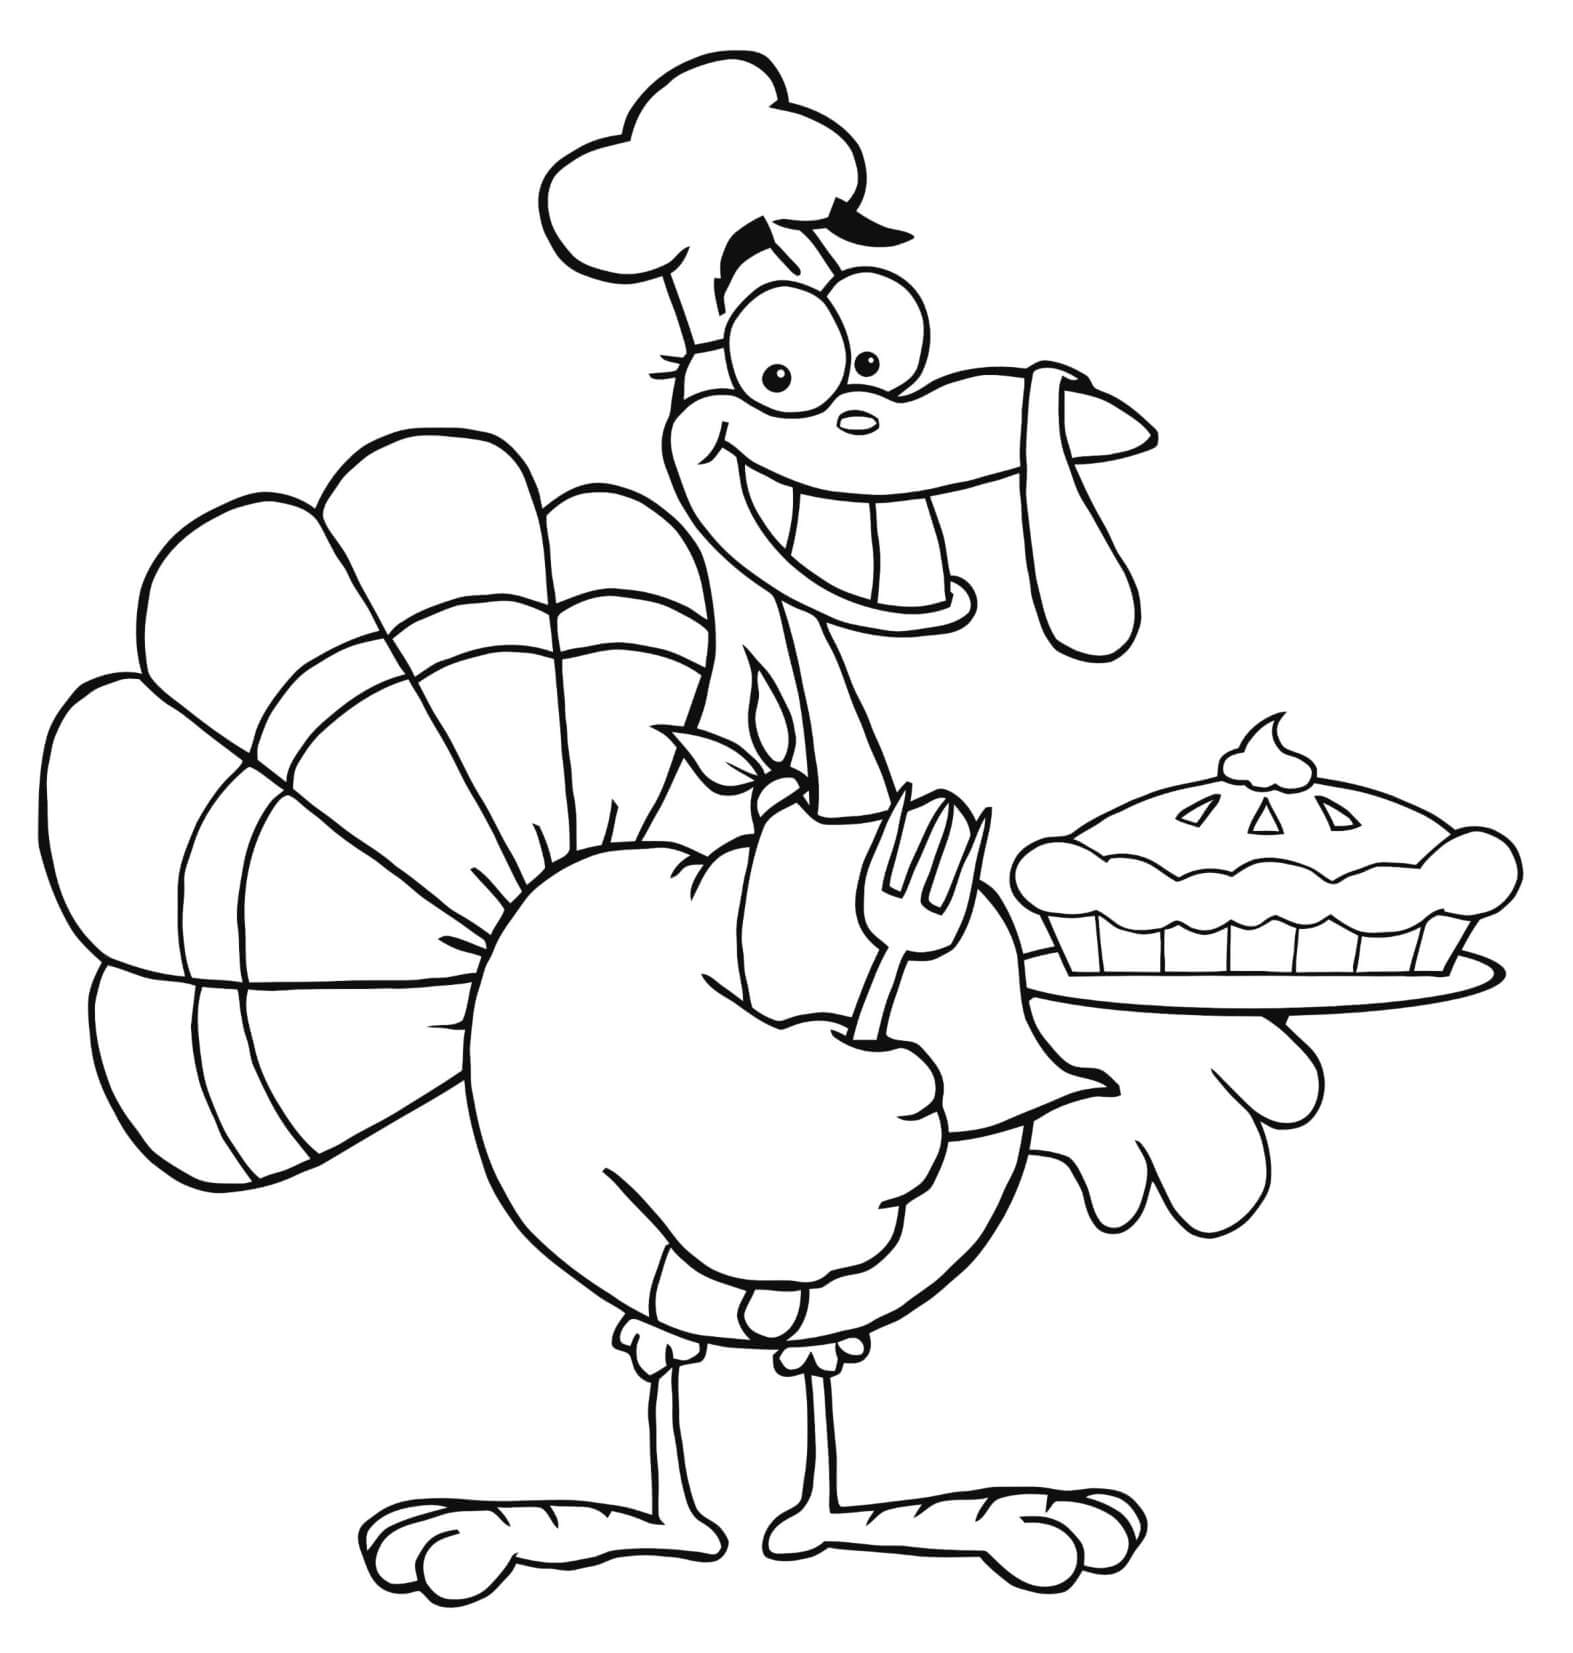 Thanksgiving Cartoon Turkey Chef With Pie Coloring Page